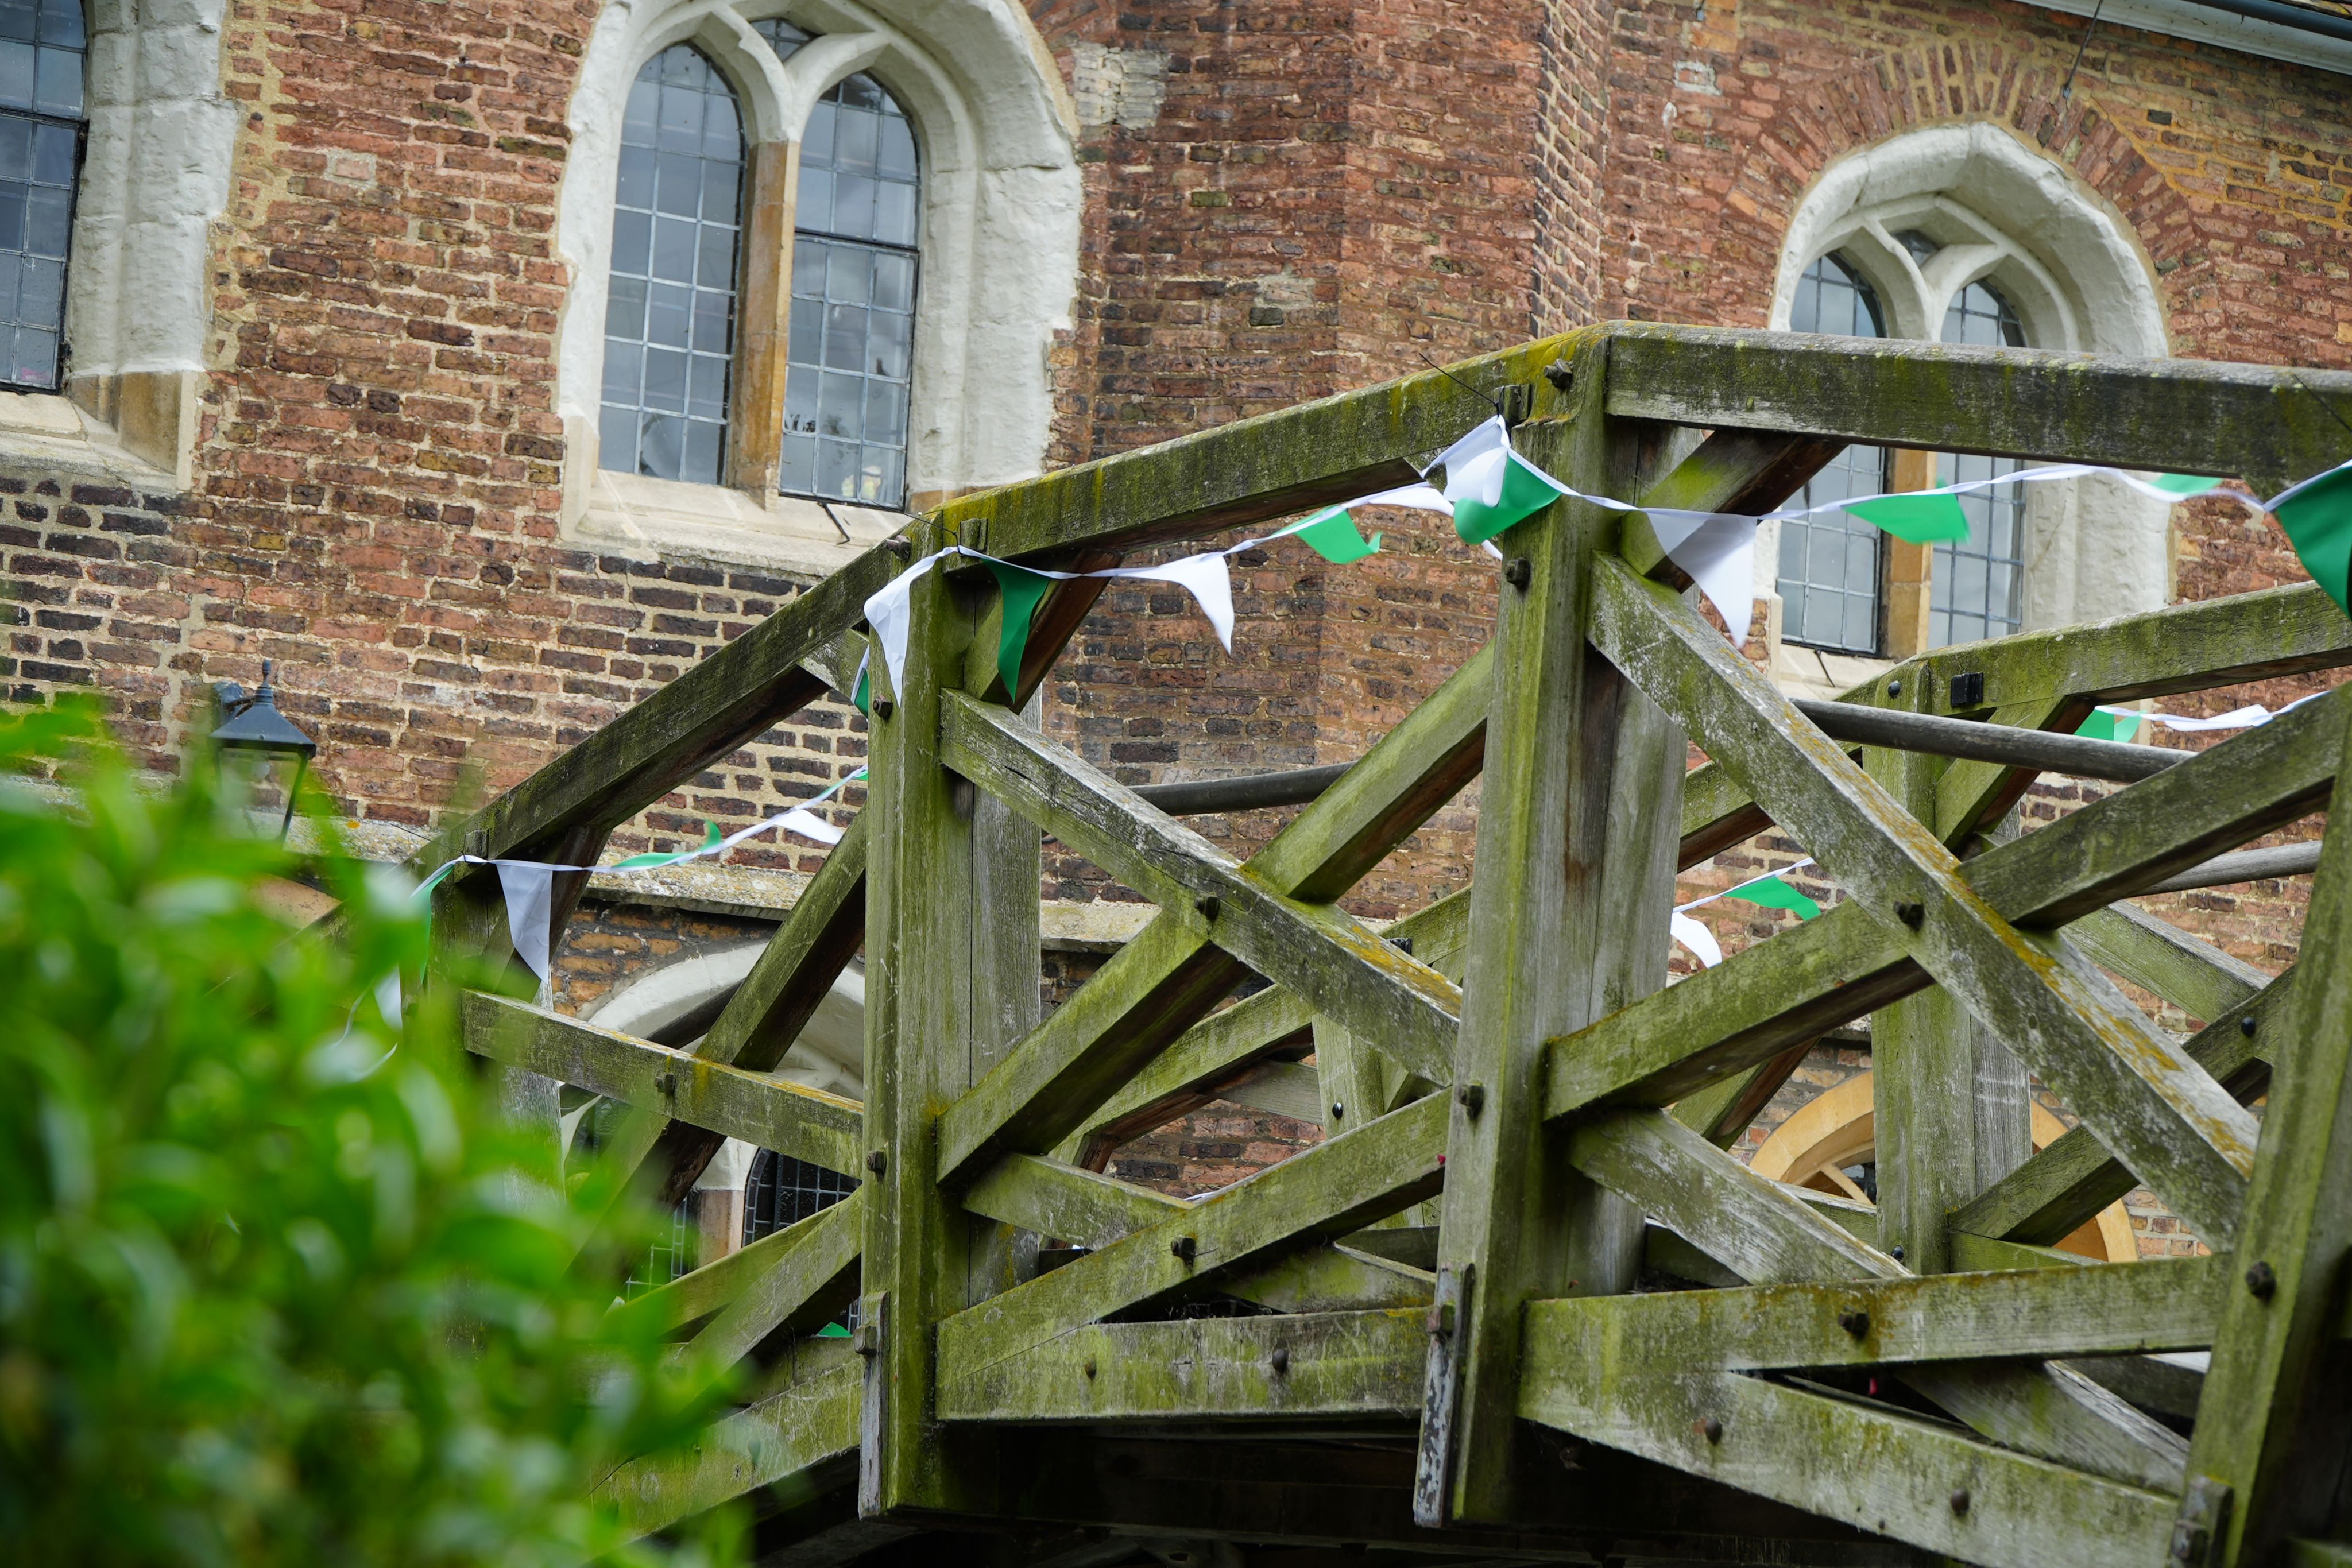 Mathematical Bridge with green and white bunting